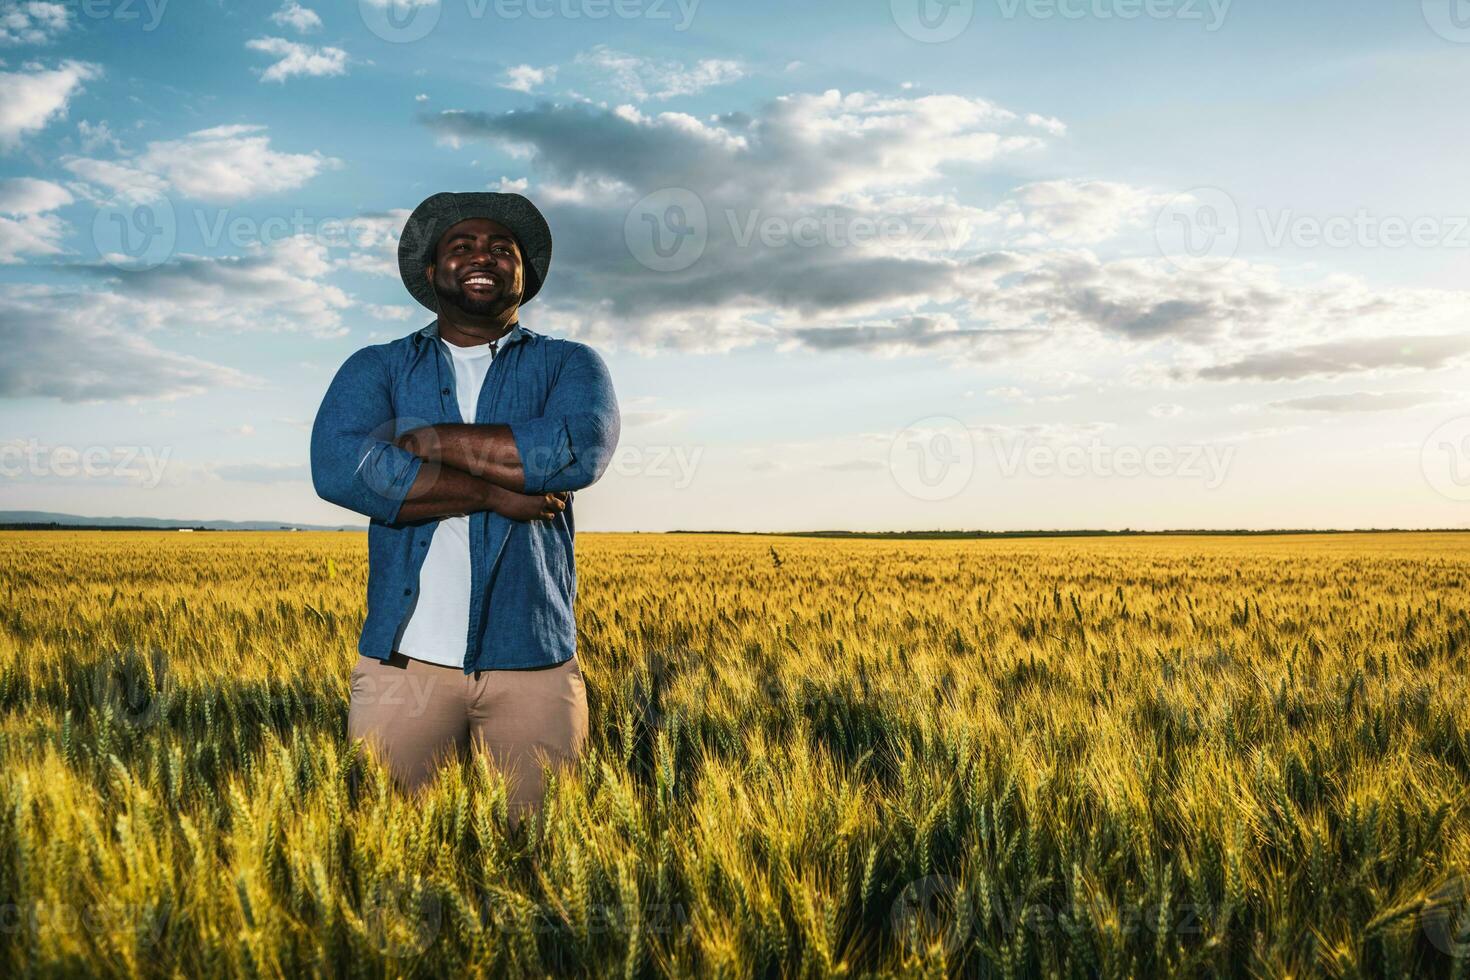 Afro farmer standing in a wheat field photo